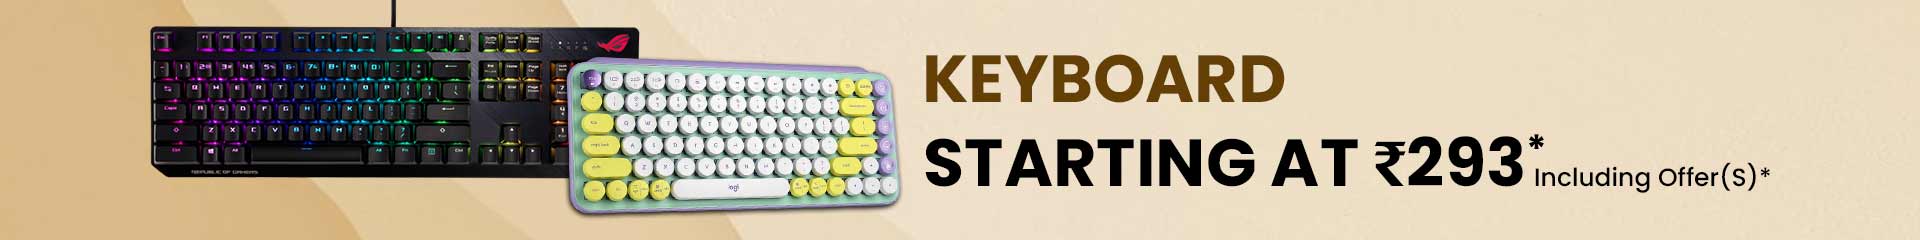 Keyboard starting at rs 293 category banner